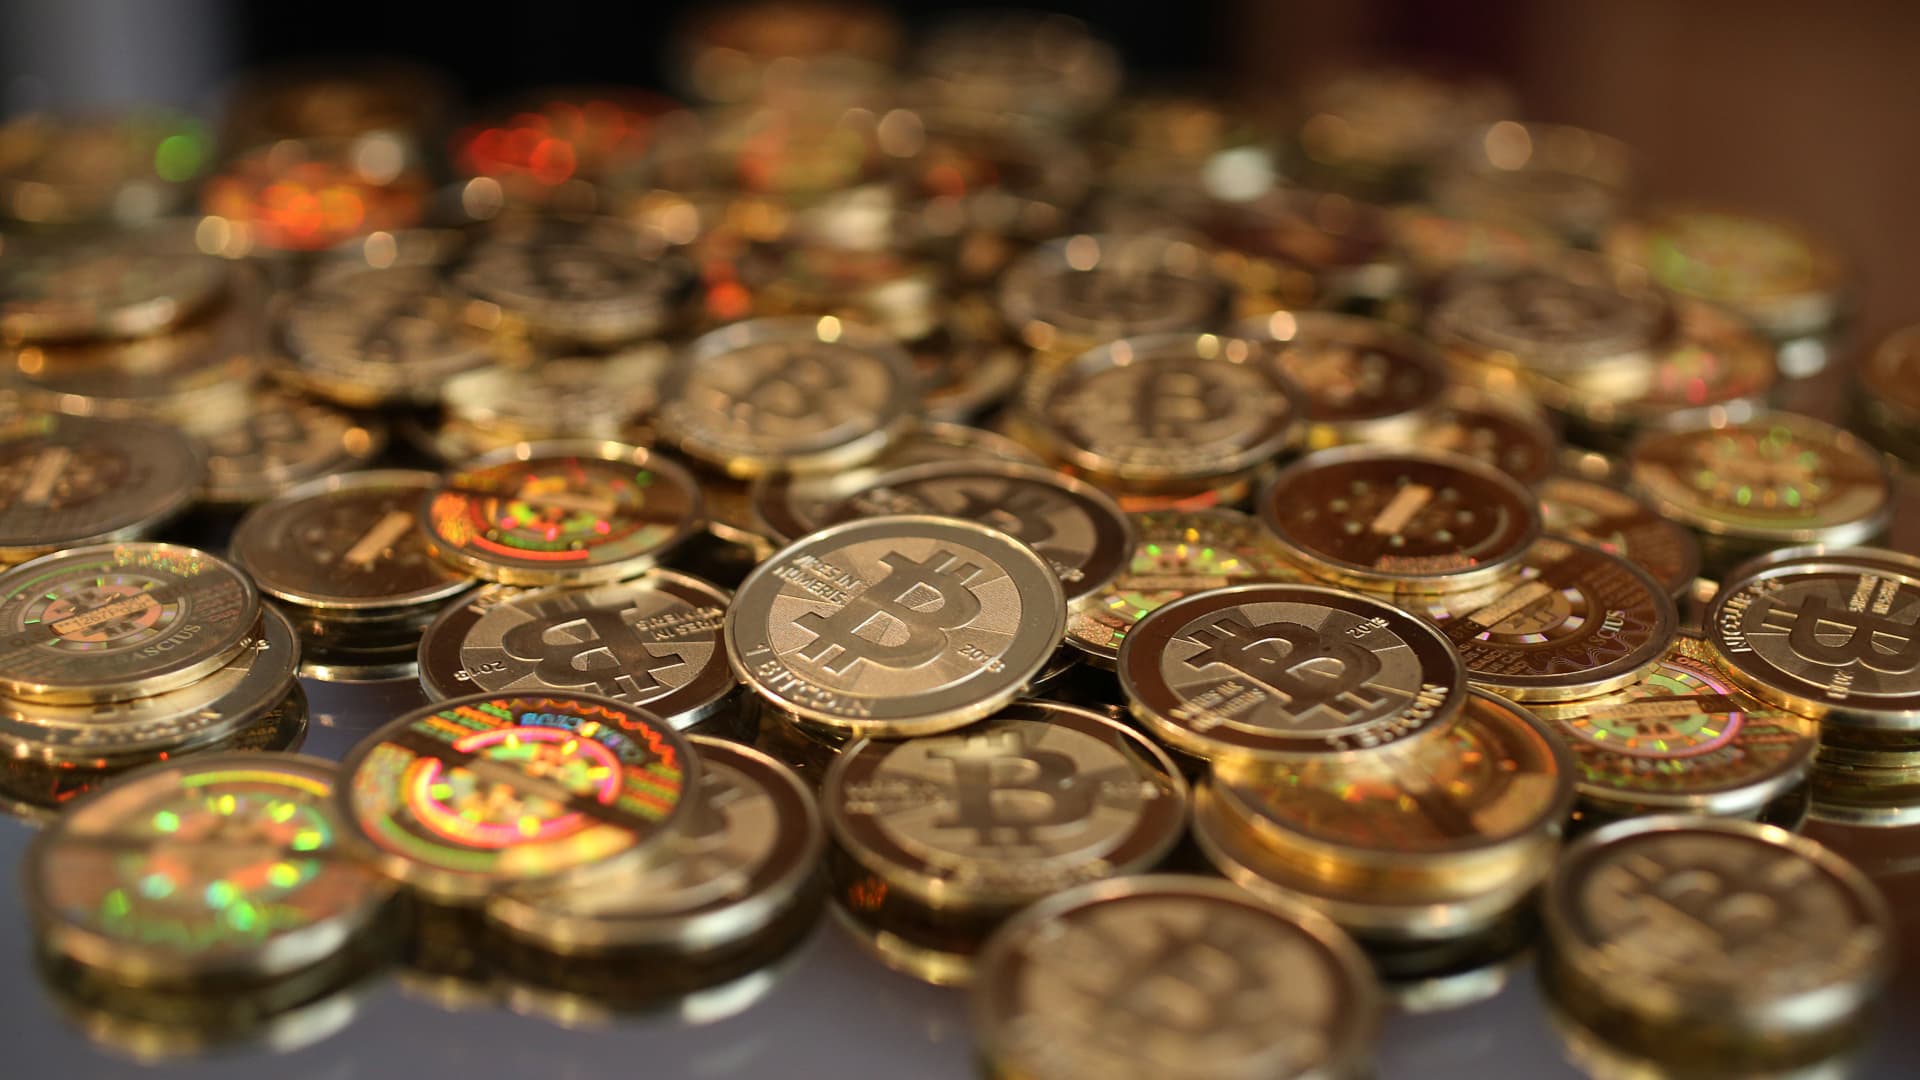 A pile of Bitcoins are shown here after Software engineer Mike Caldwell minted them in his shop in Sandy, Utah.